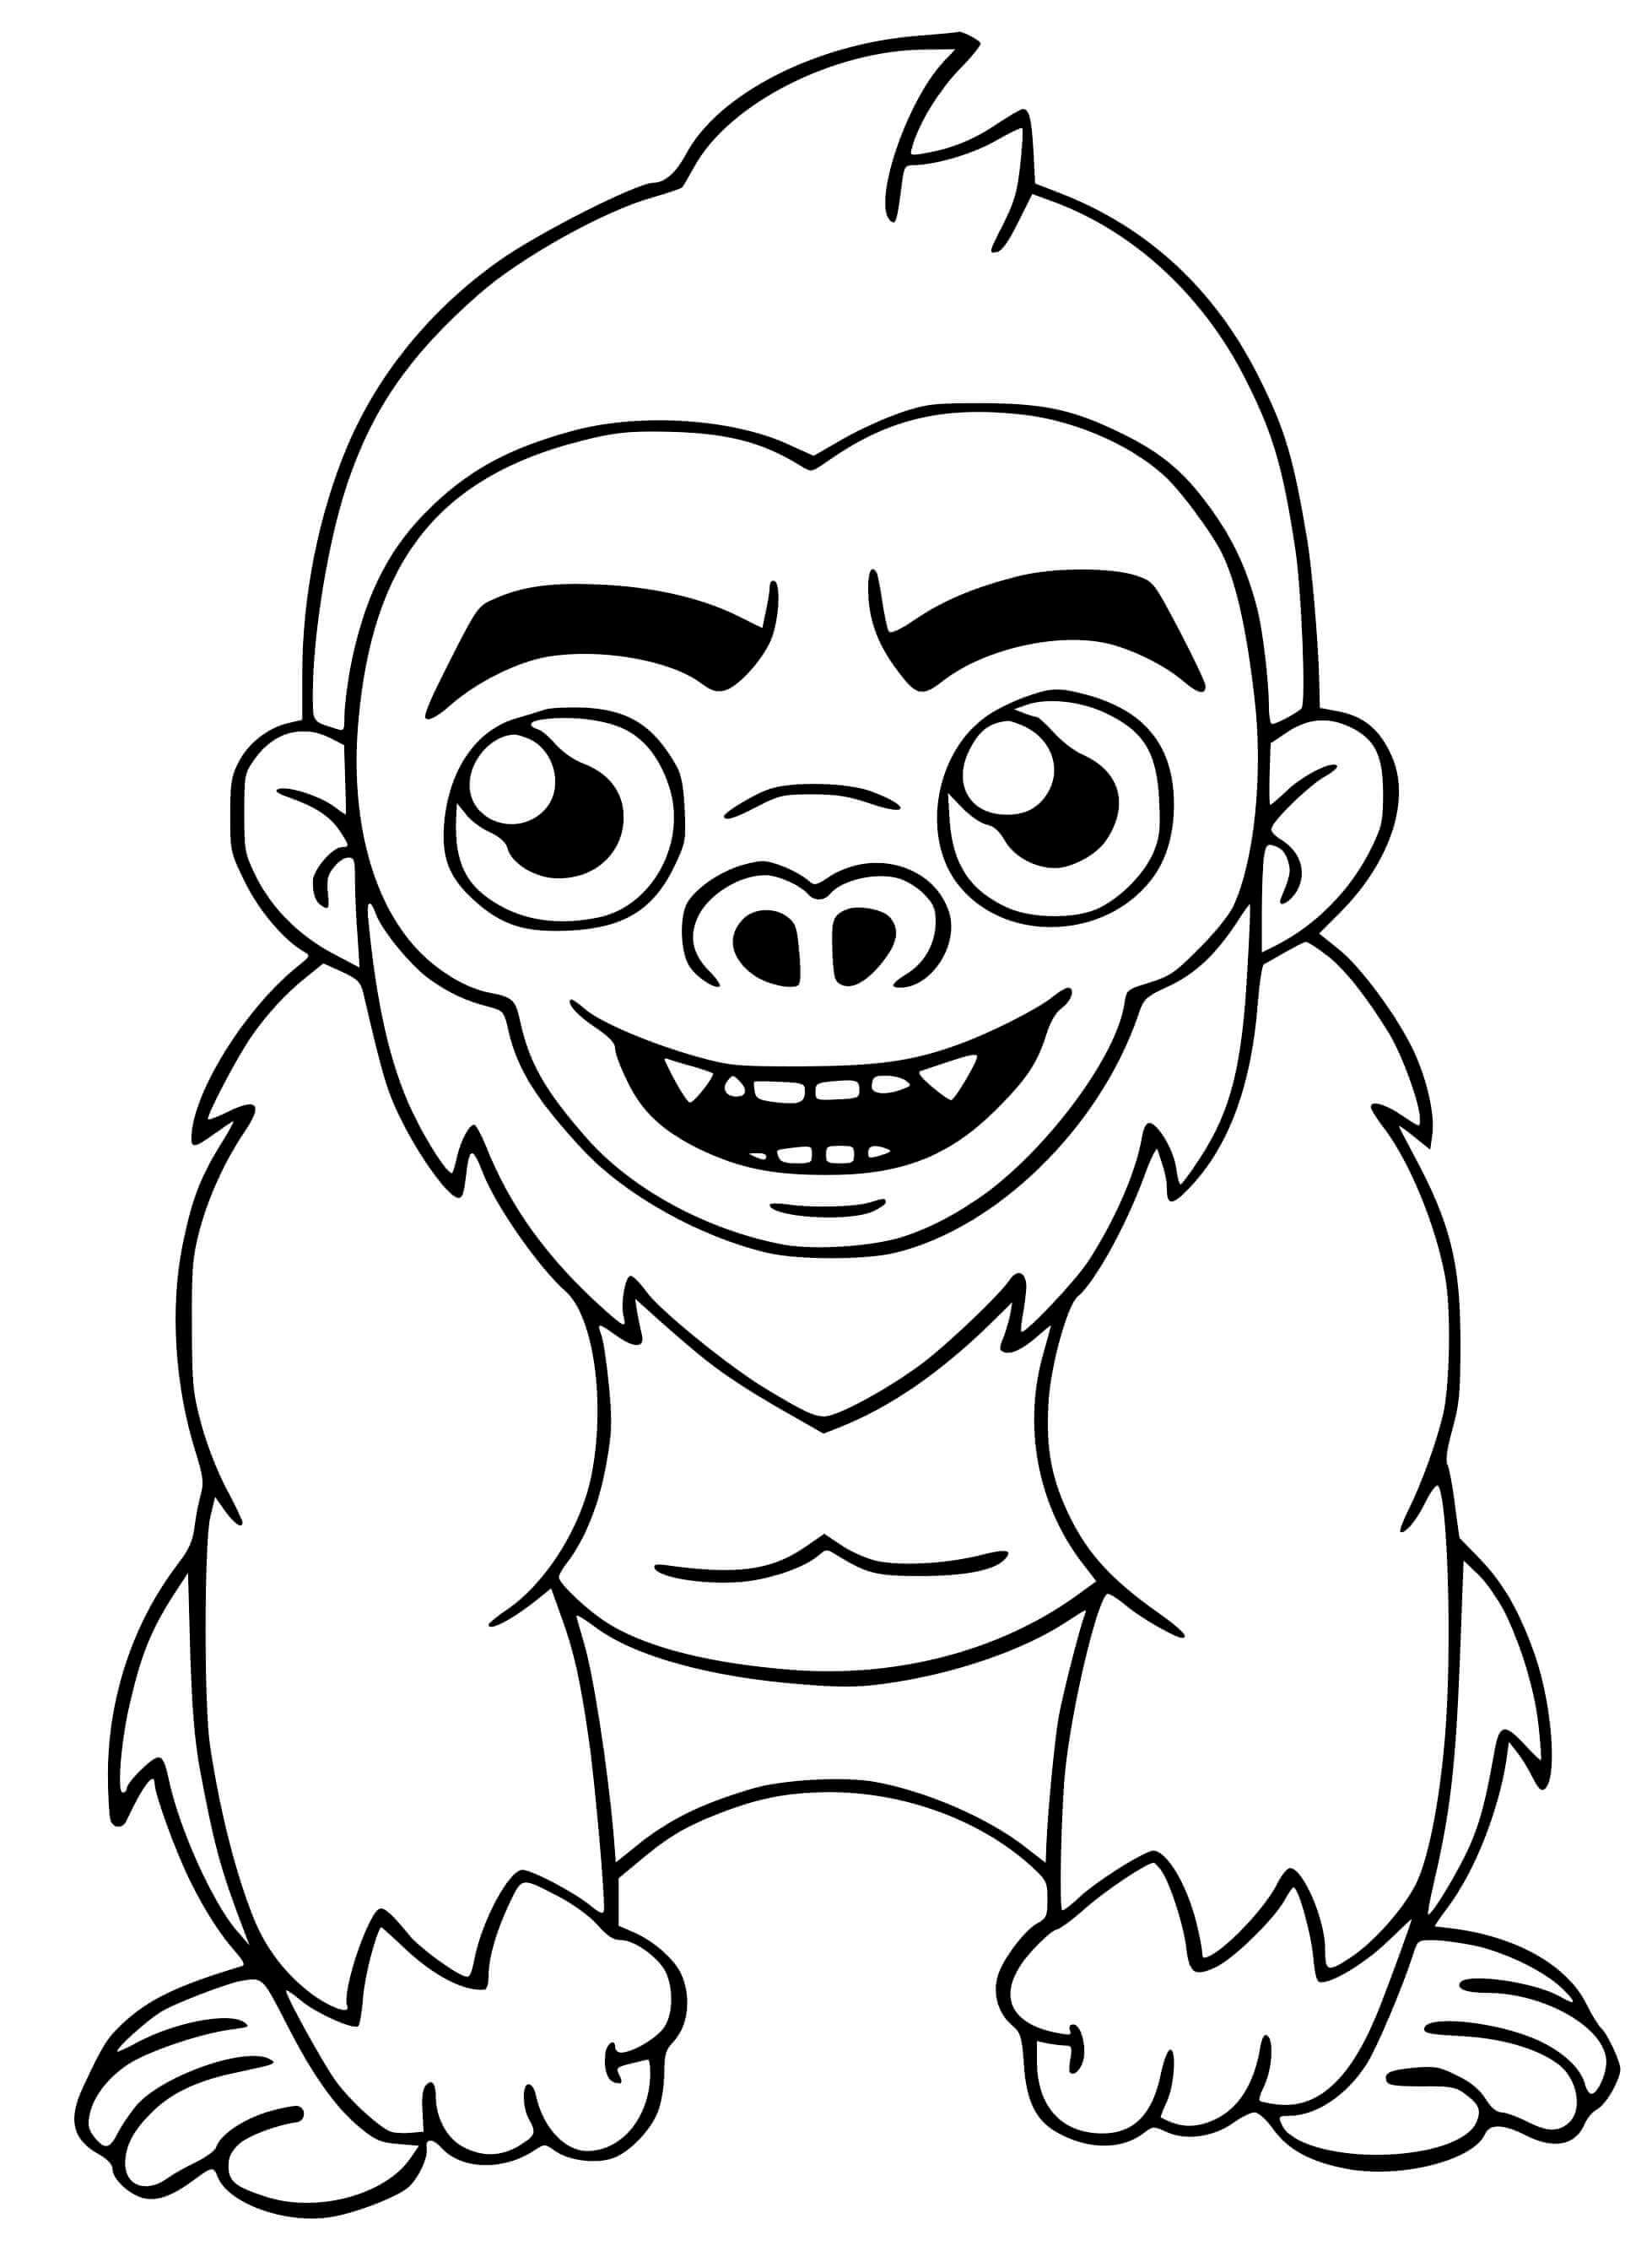 Fortnite Beast Boy Monkey Skin Coloring Pages   Coloring Cool